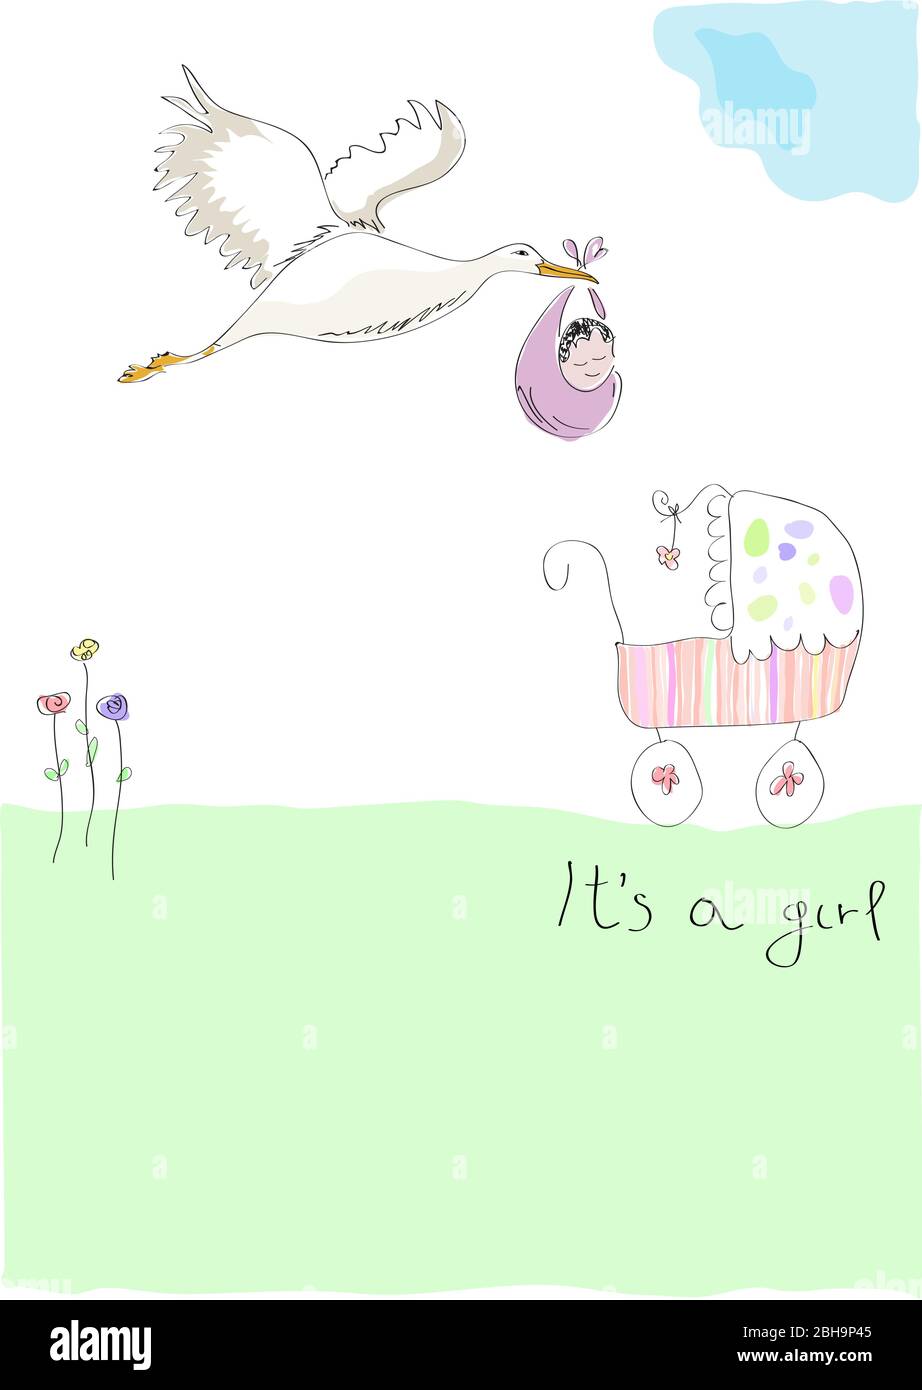 Cute Handmade Birth Announcement with Baby and Stork